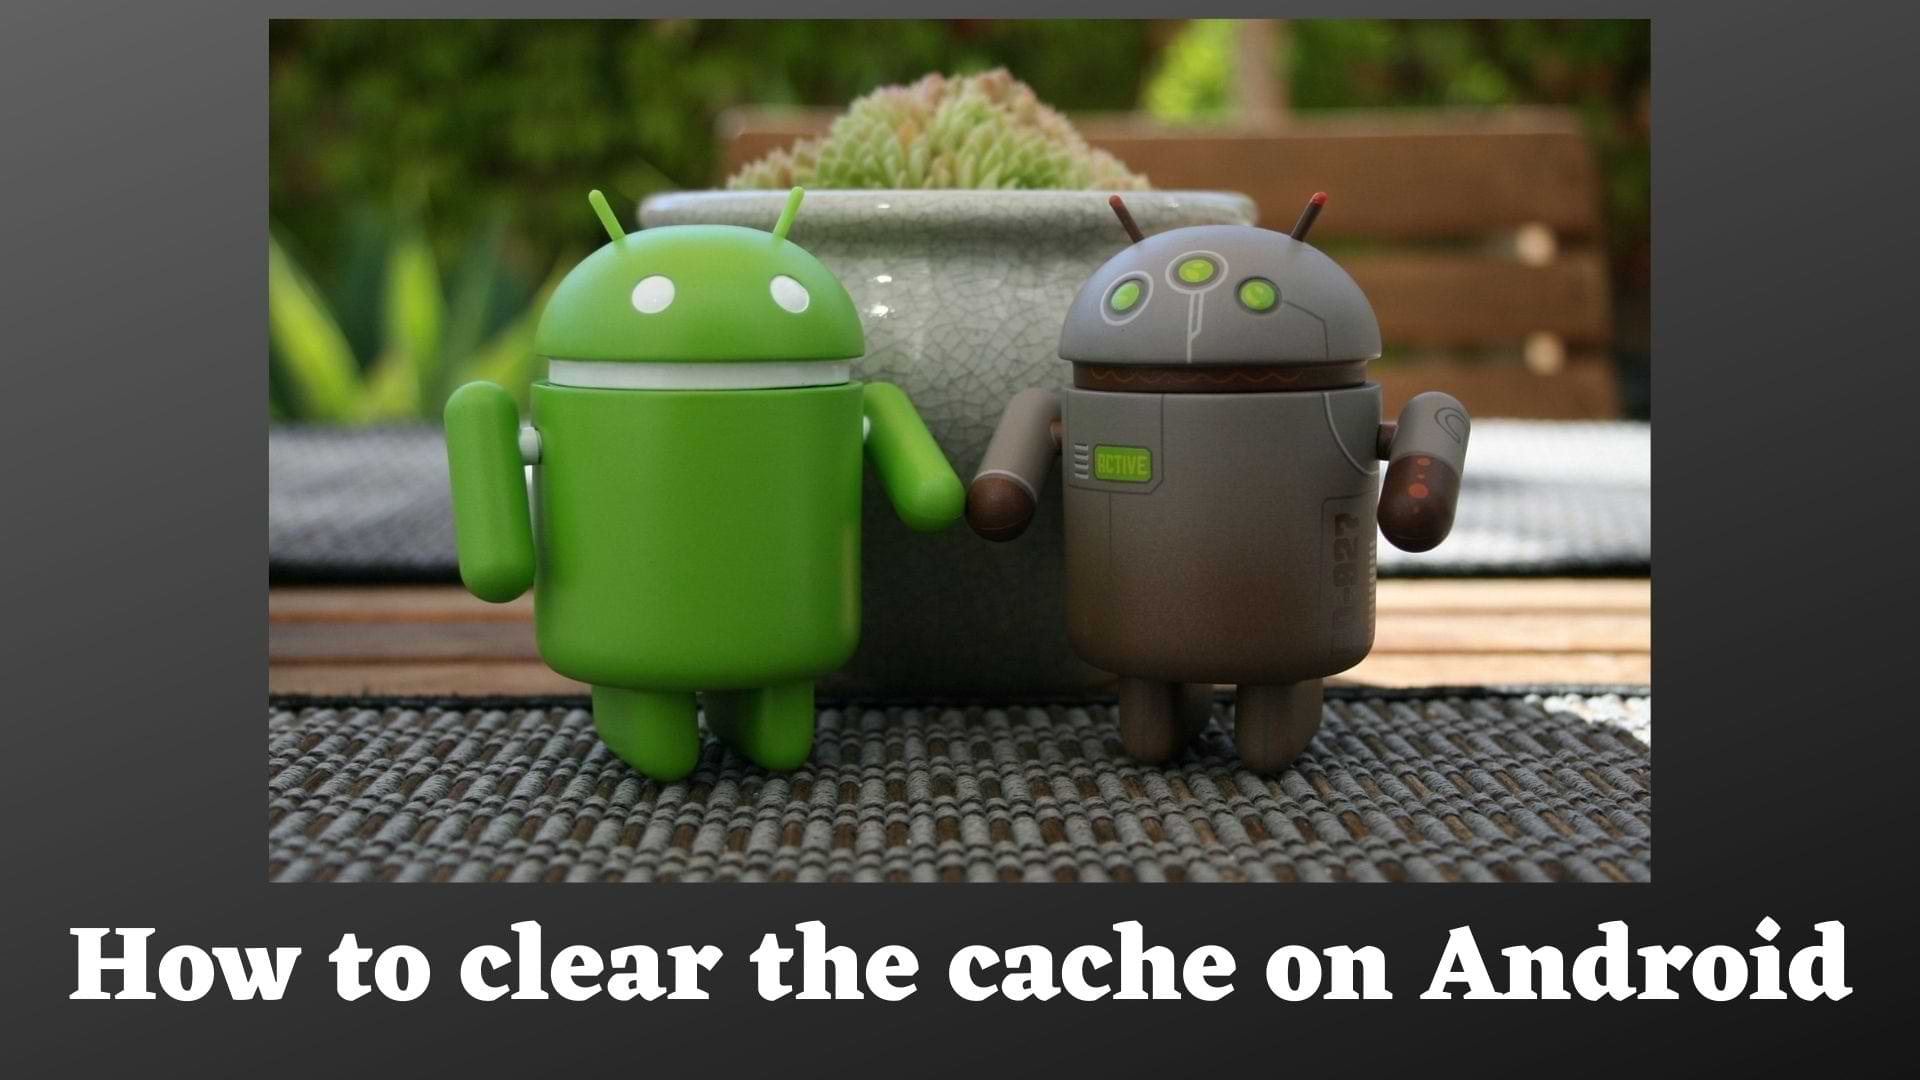 How to clear the cache on Android